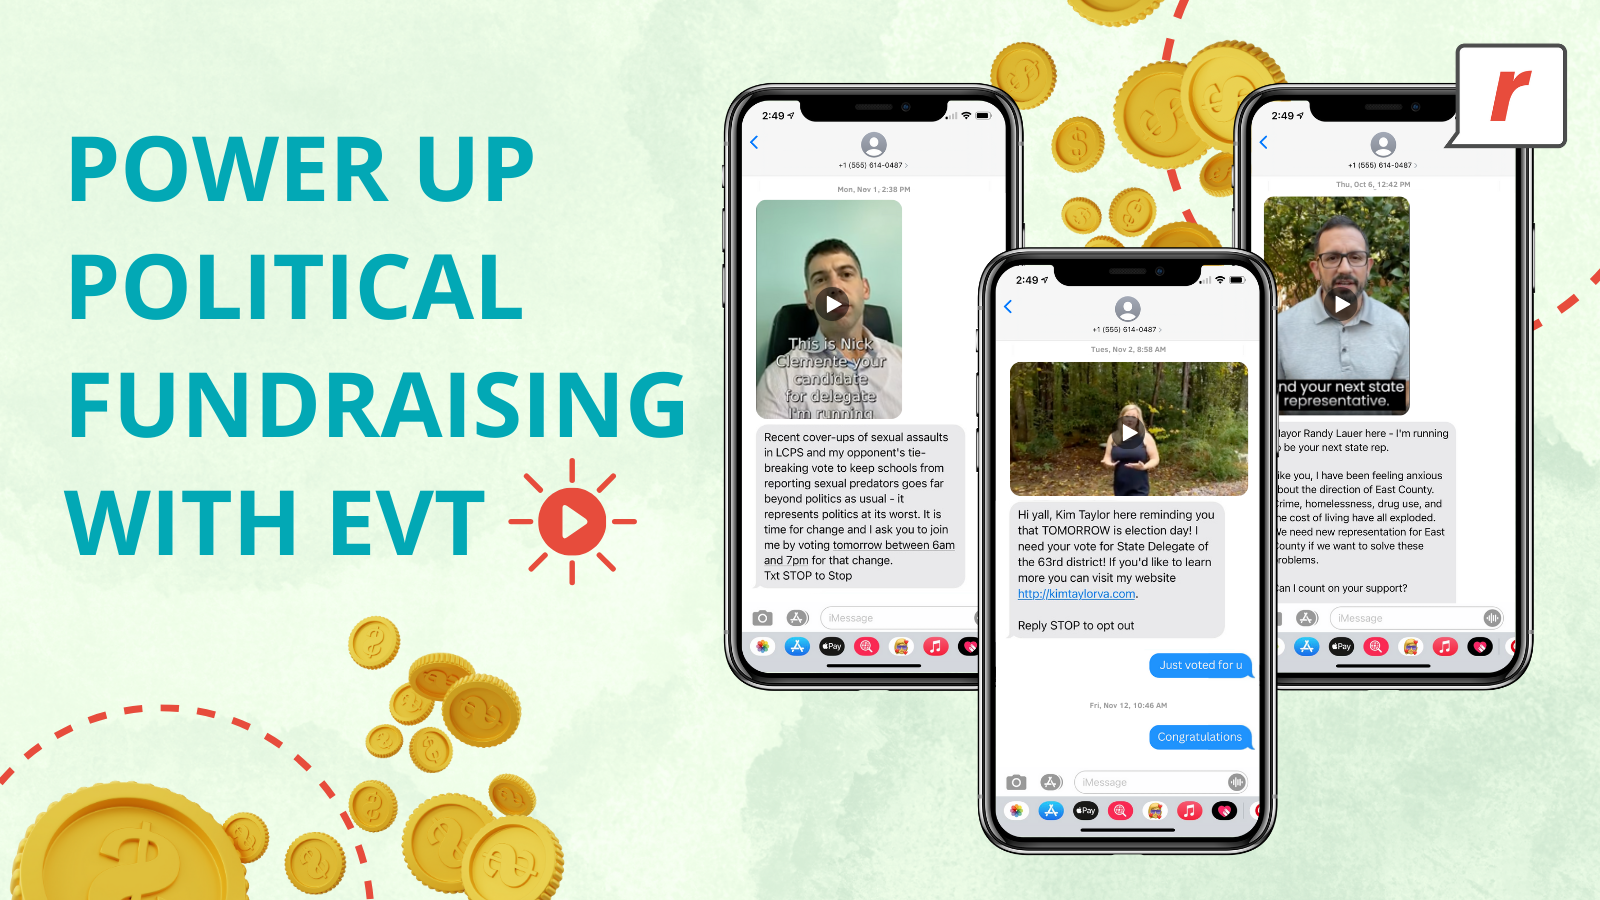 Power Up Political Fundraising with Direct-to-Camera EVT From RumbleUp